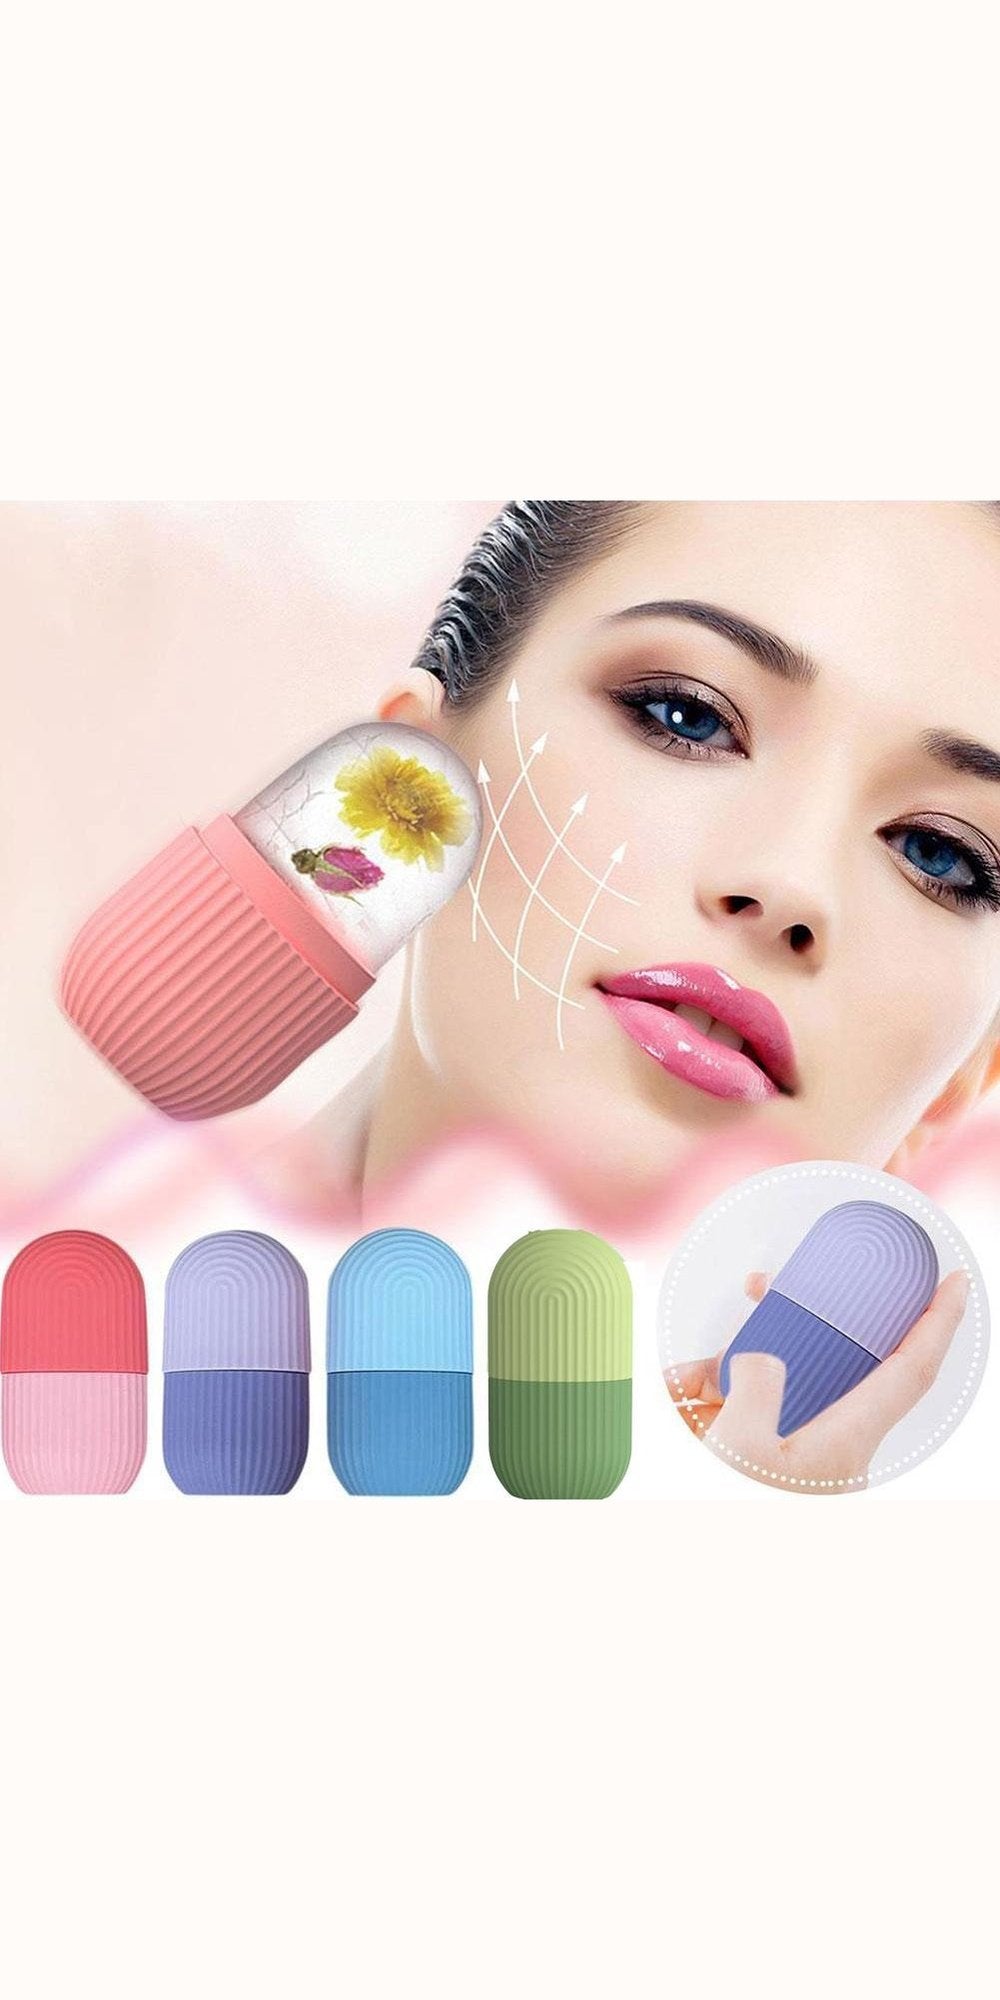 Silicone Ice Cube Tray Mold Face Beauty Lifting Tool